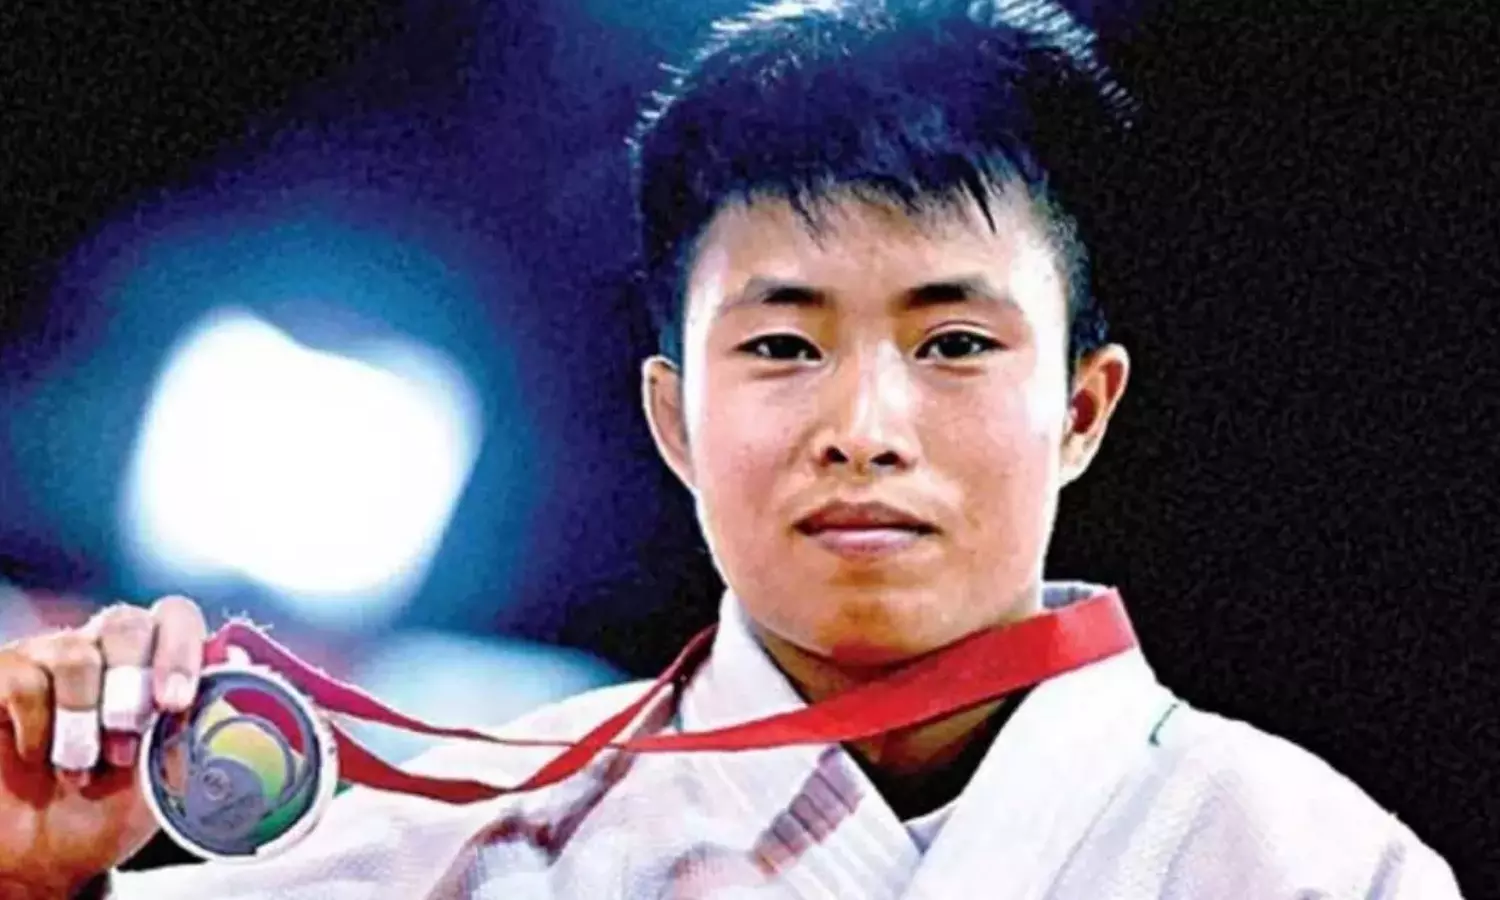 Tokyo Olympics Judo Day 1, July 24 – Sushila Devi all set to make her debut at the Olympic Games